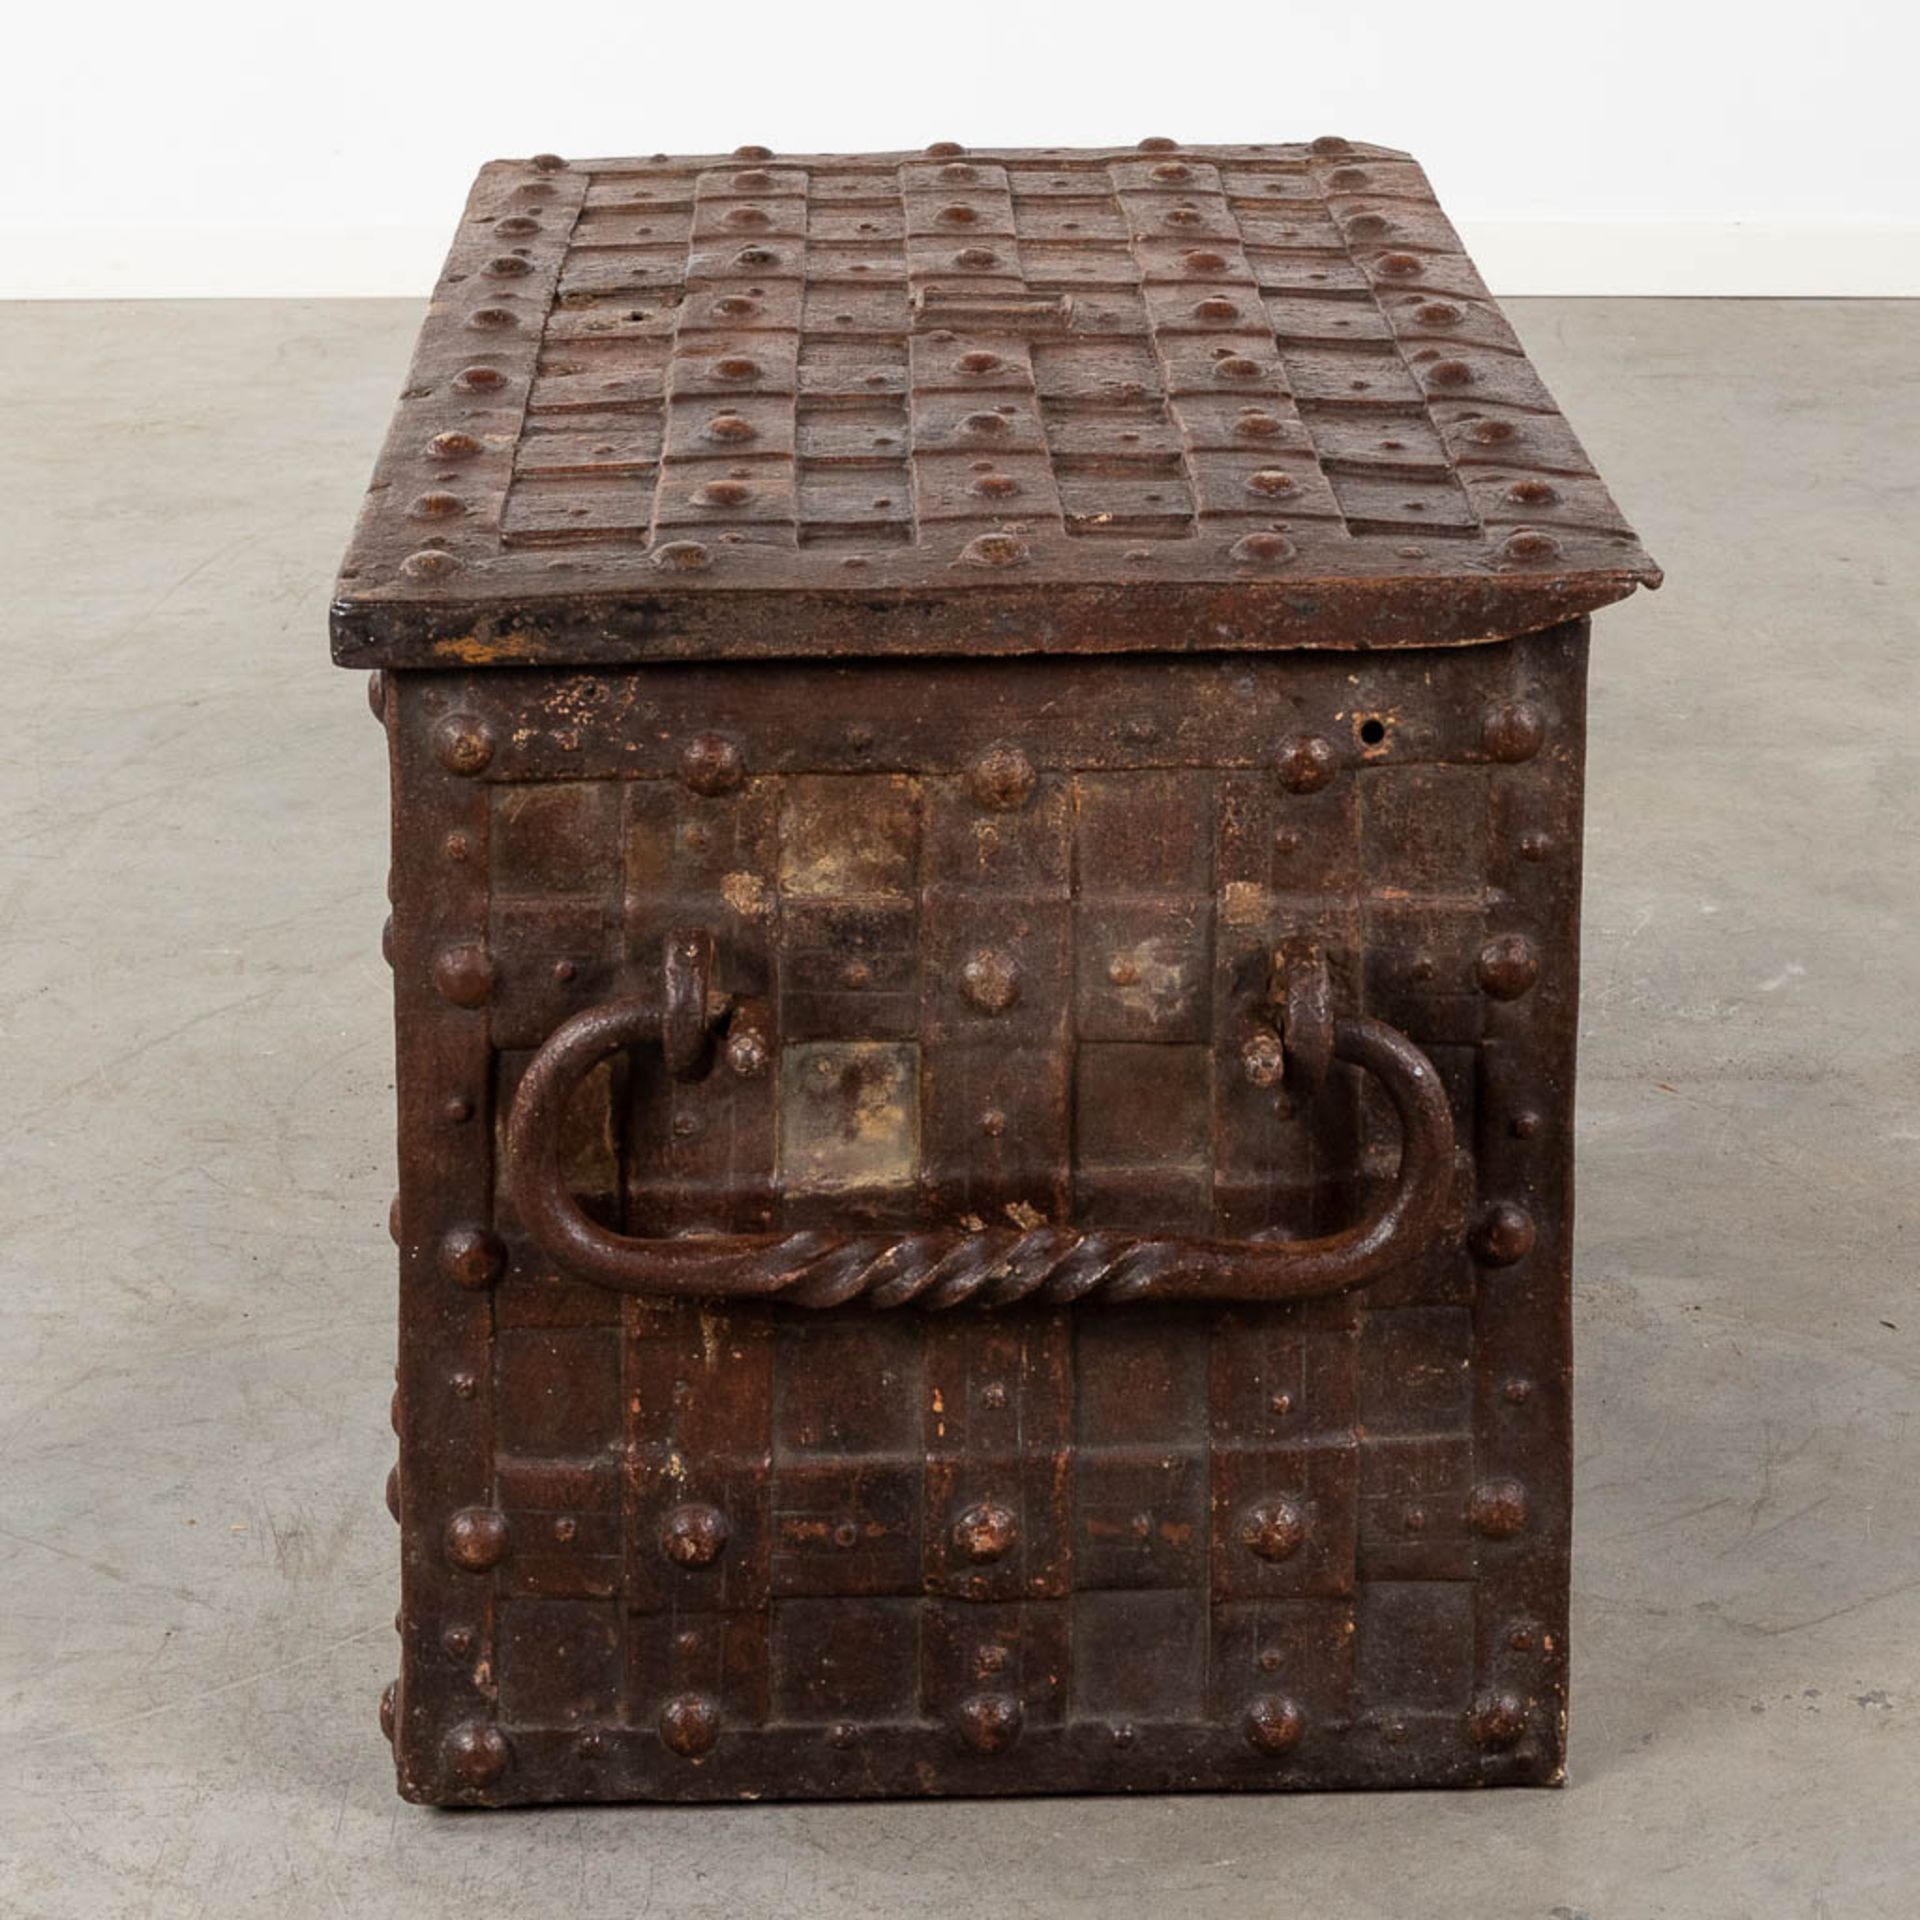 An antique metal chest in the style of Nuremberg chests, with a wrought iron exterior. 18th C. (D:51 - Image 5 of 9